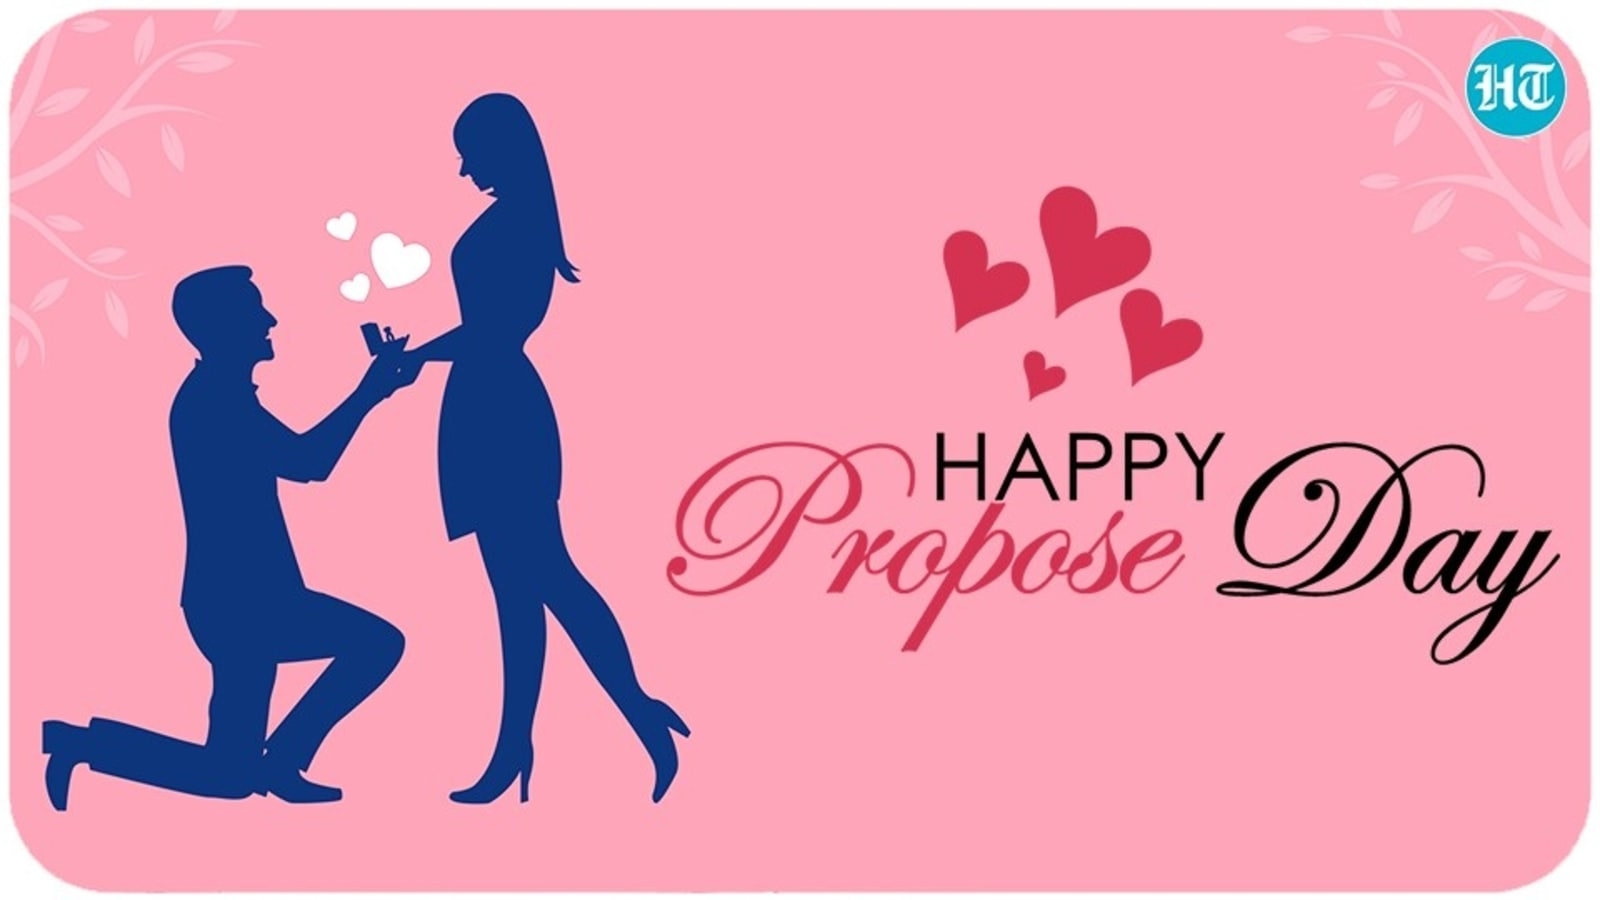 Propose Day: 5 Unique Ideas To Ask Your Someone Special Out